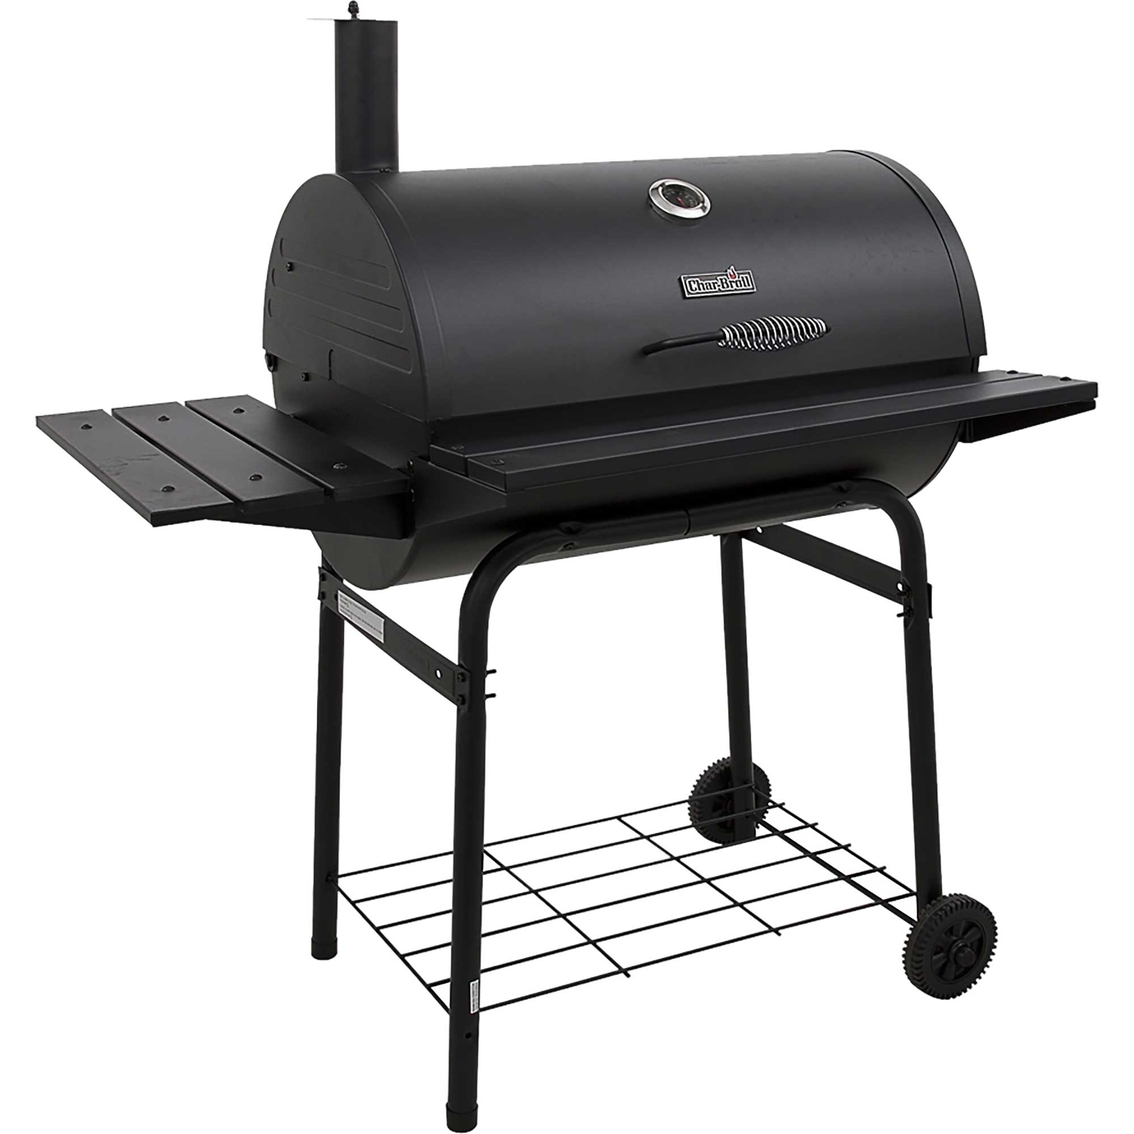 Char-Broil Large Charcoal Barrel Grill - Image 2 of 2